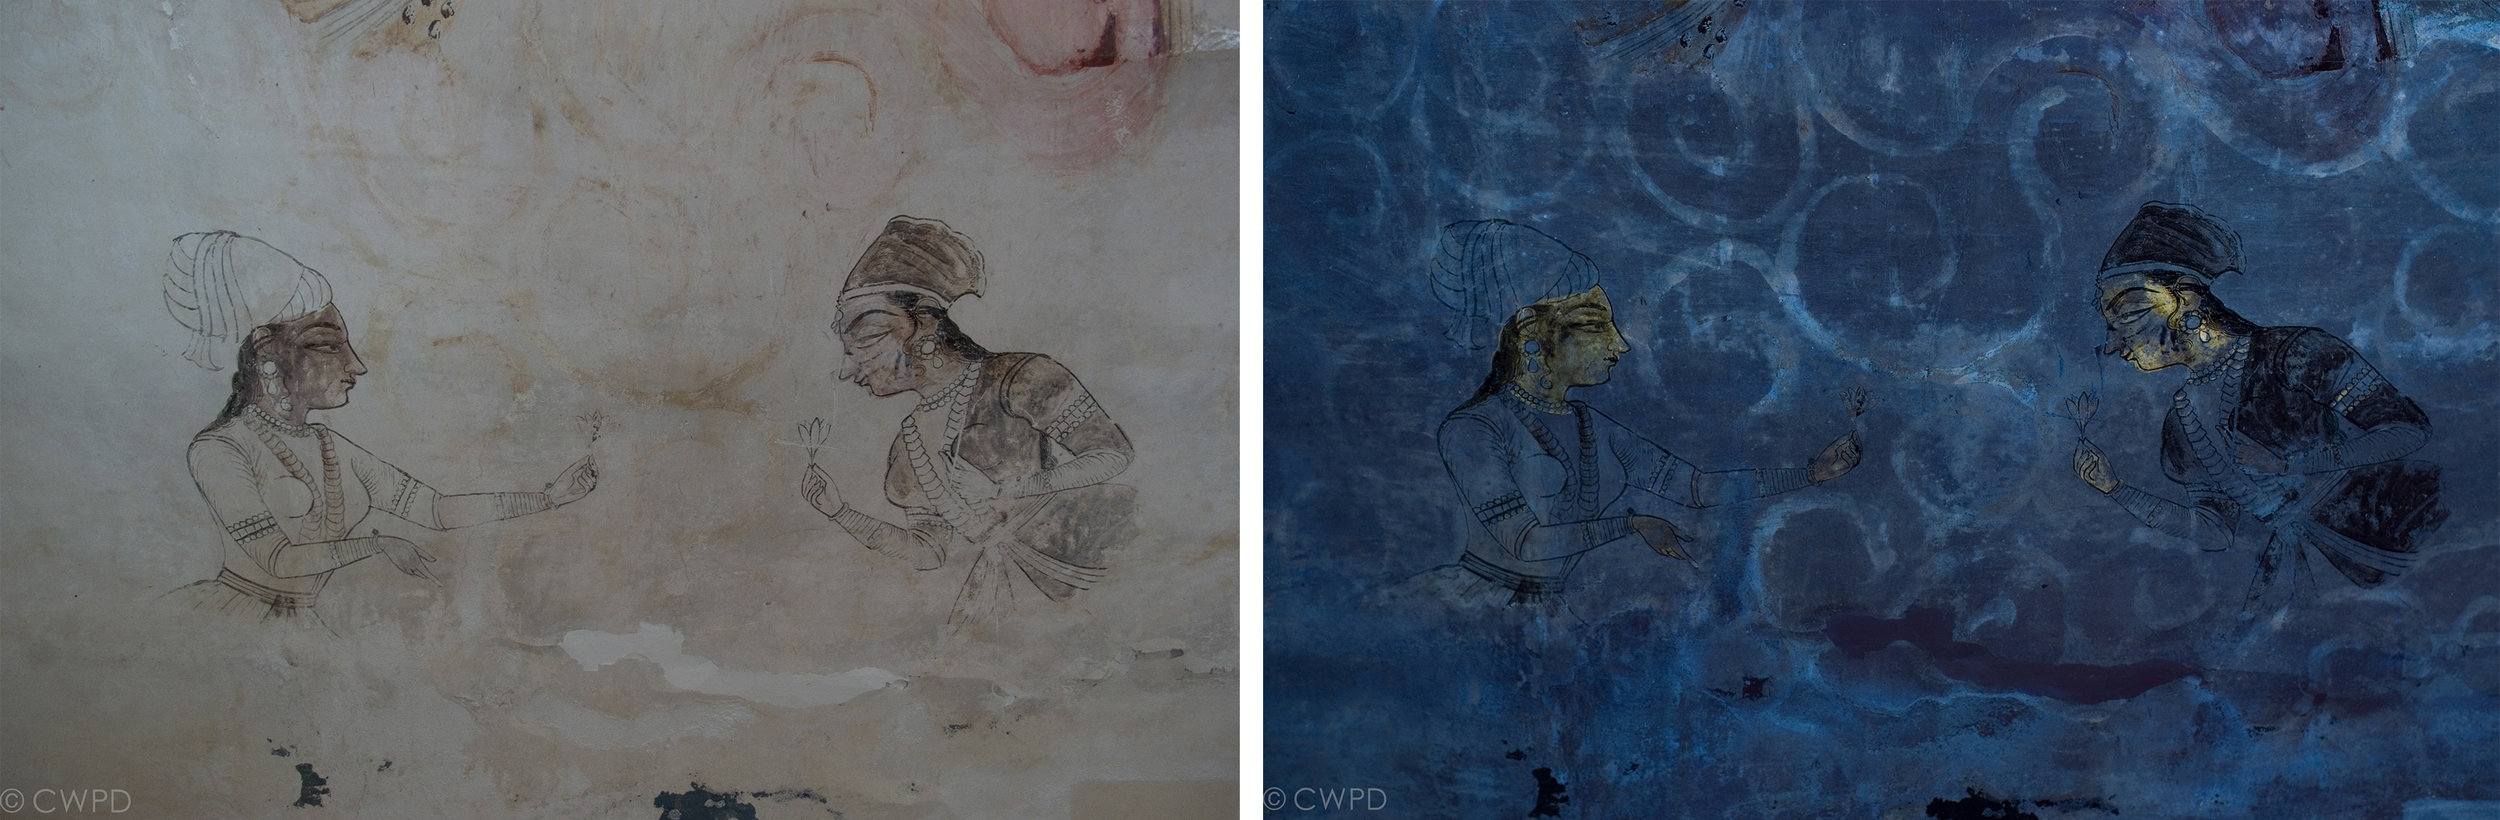   Detail of the painting in the vault in visible (left) and ultraviolet (right) light. Ultraviolet fluorescence exposes the faded organic materials originally used to depict the clouds and rain of the monsoon.   Image © Courtauld CWPD 